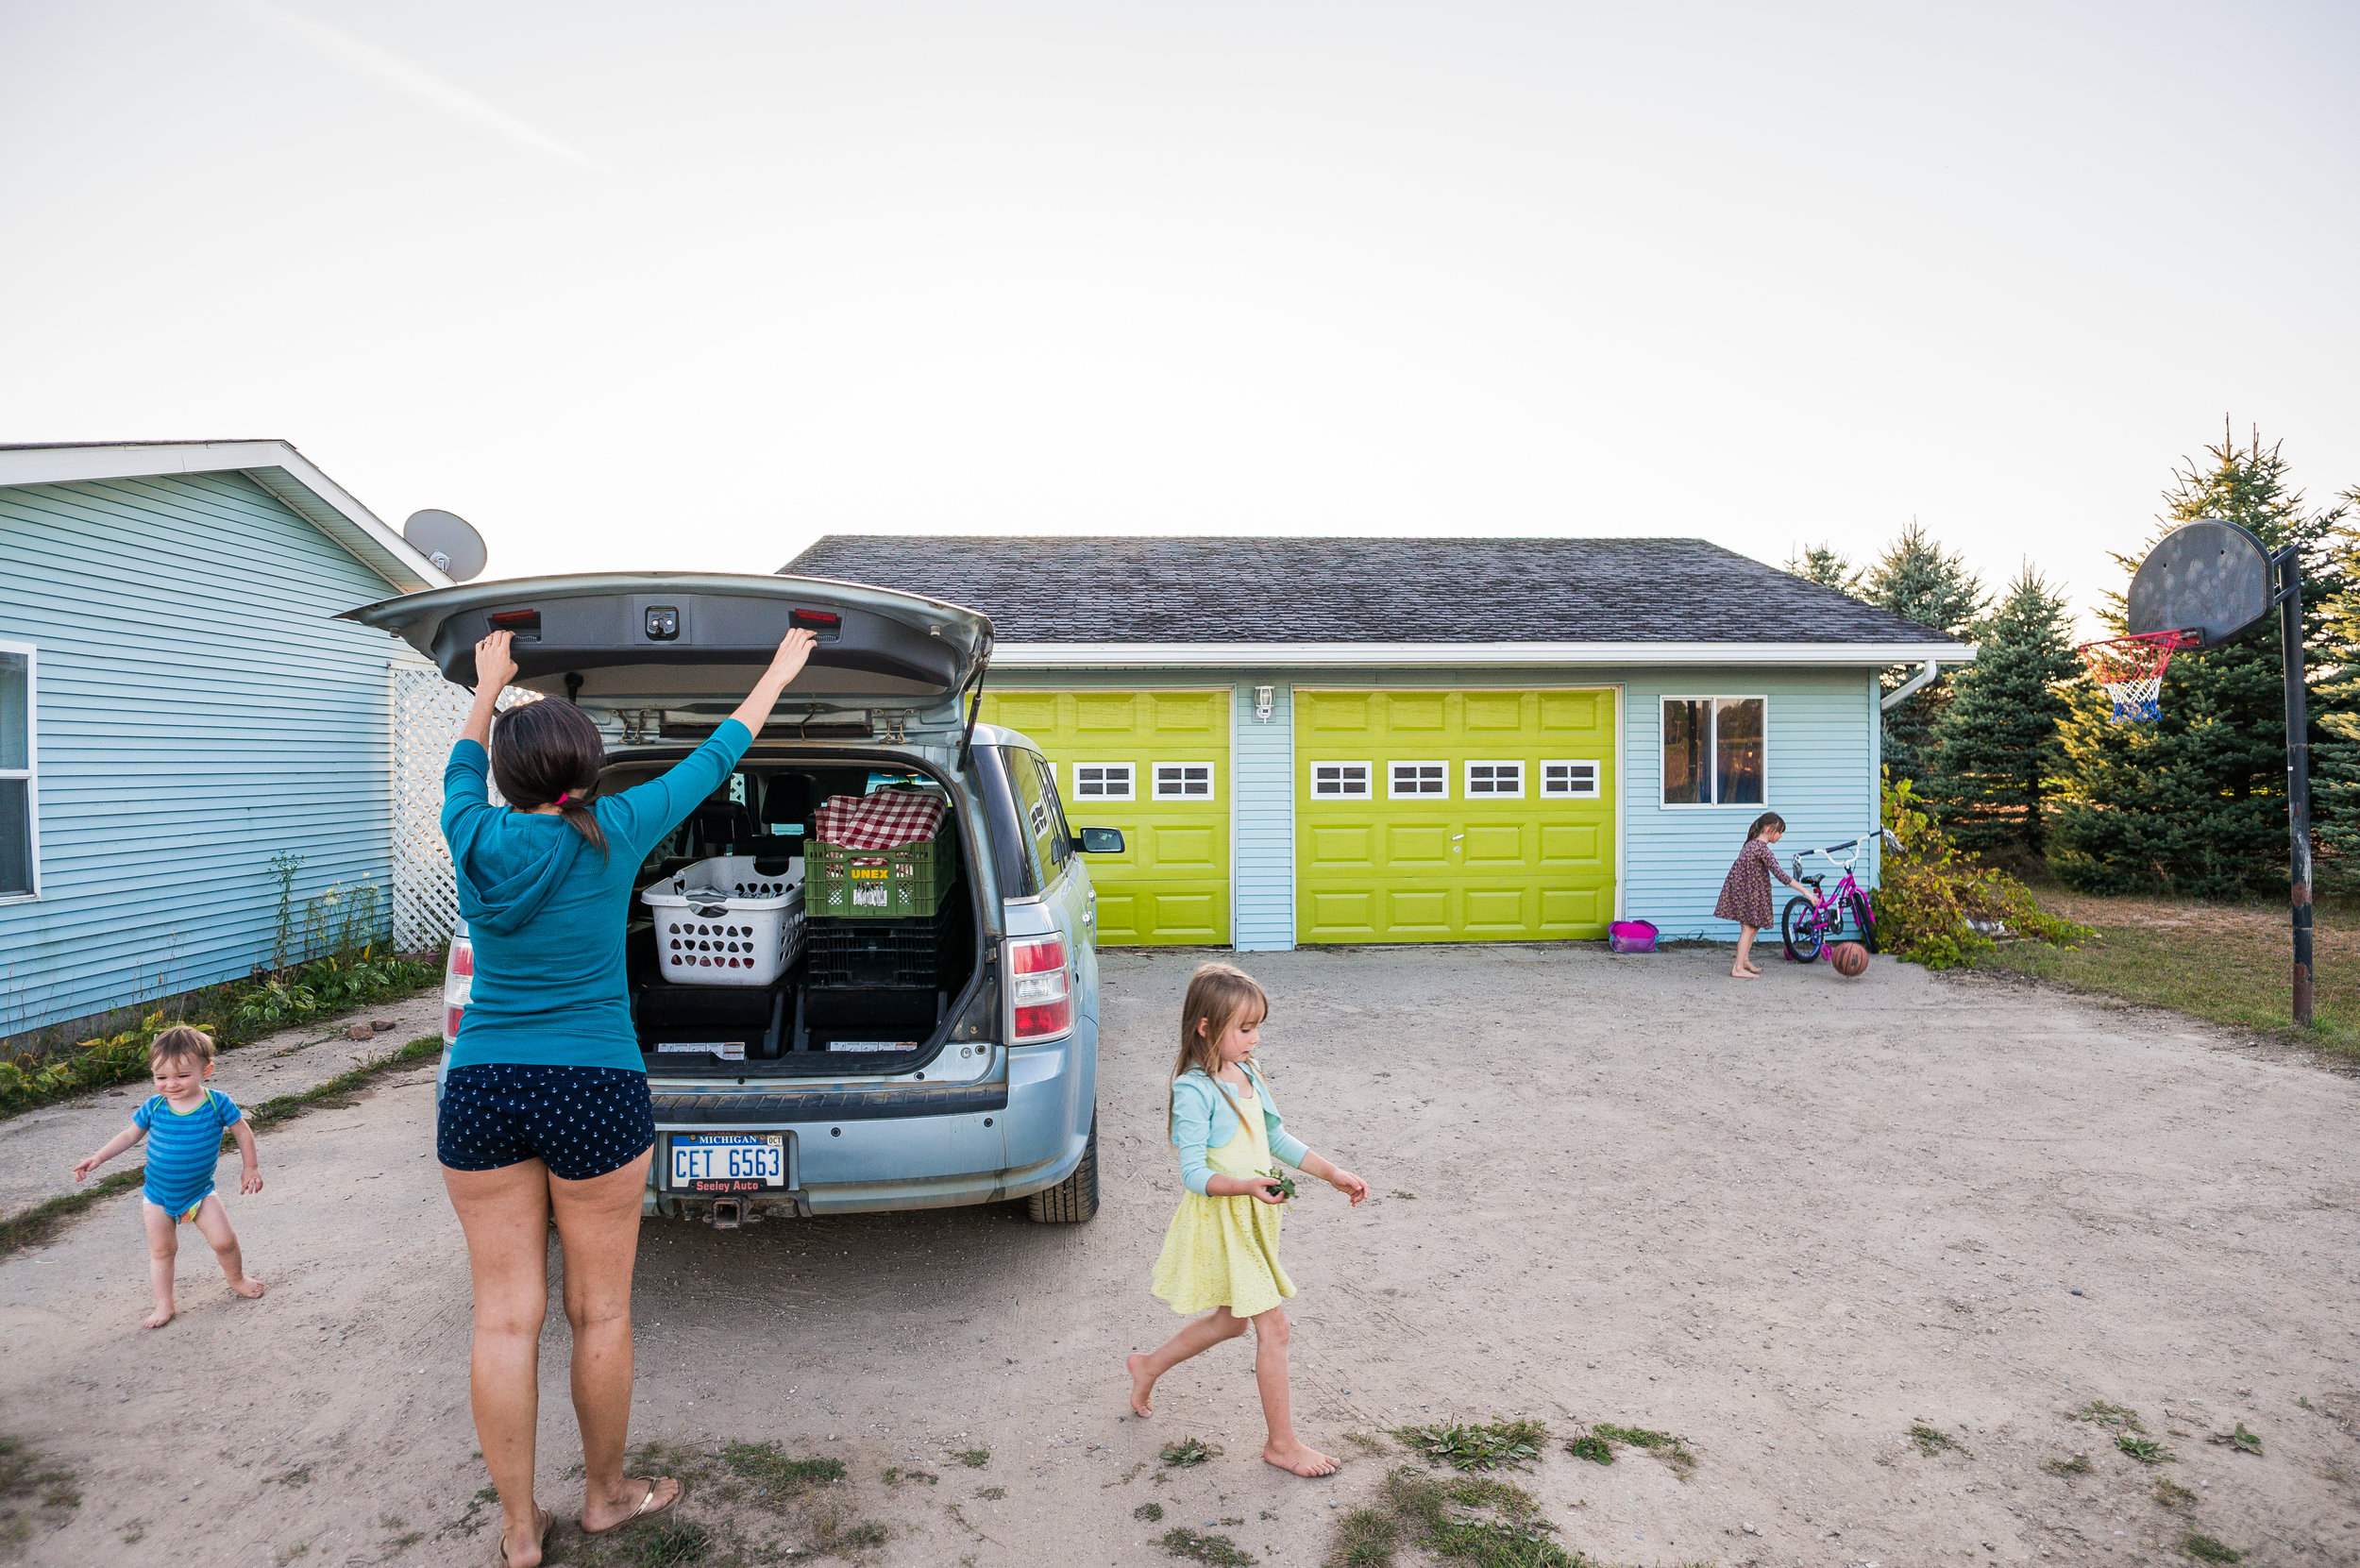  Michelle unpacks the car while her kids wander around the driveway, Sept. 18 at their home in Elwell. 'Little T', left, often wanders towards the road, requiring constant supervision from his parents or siblings.&nbsp; 